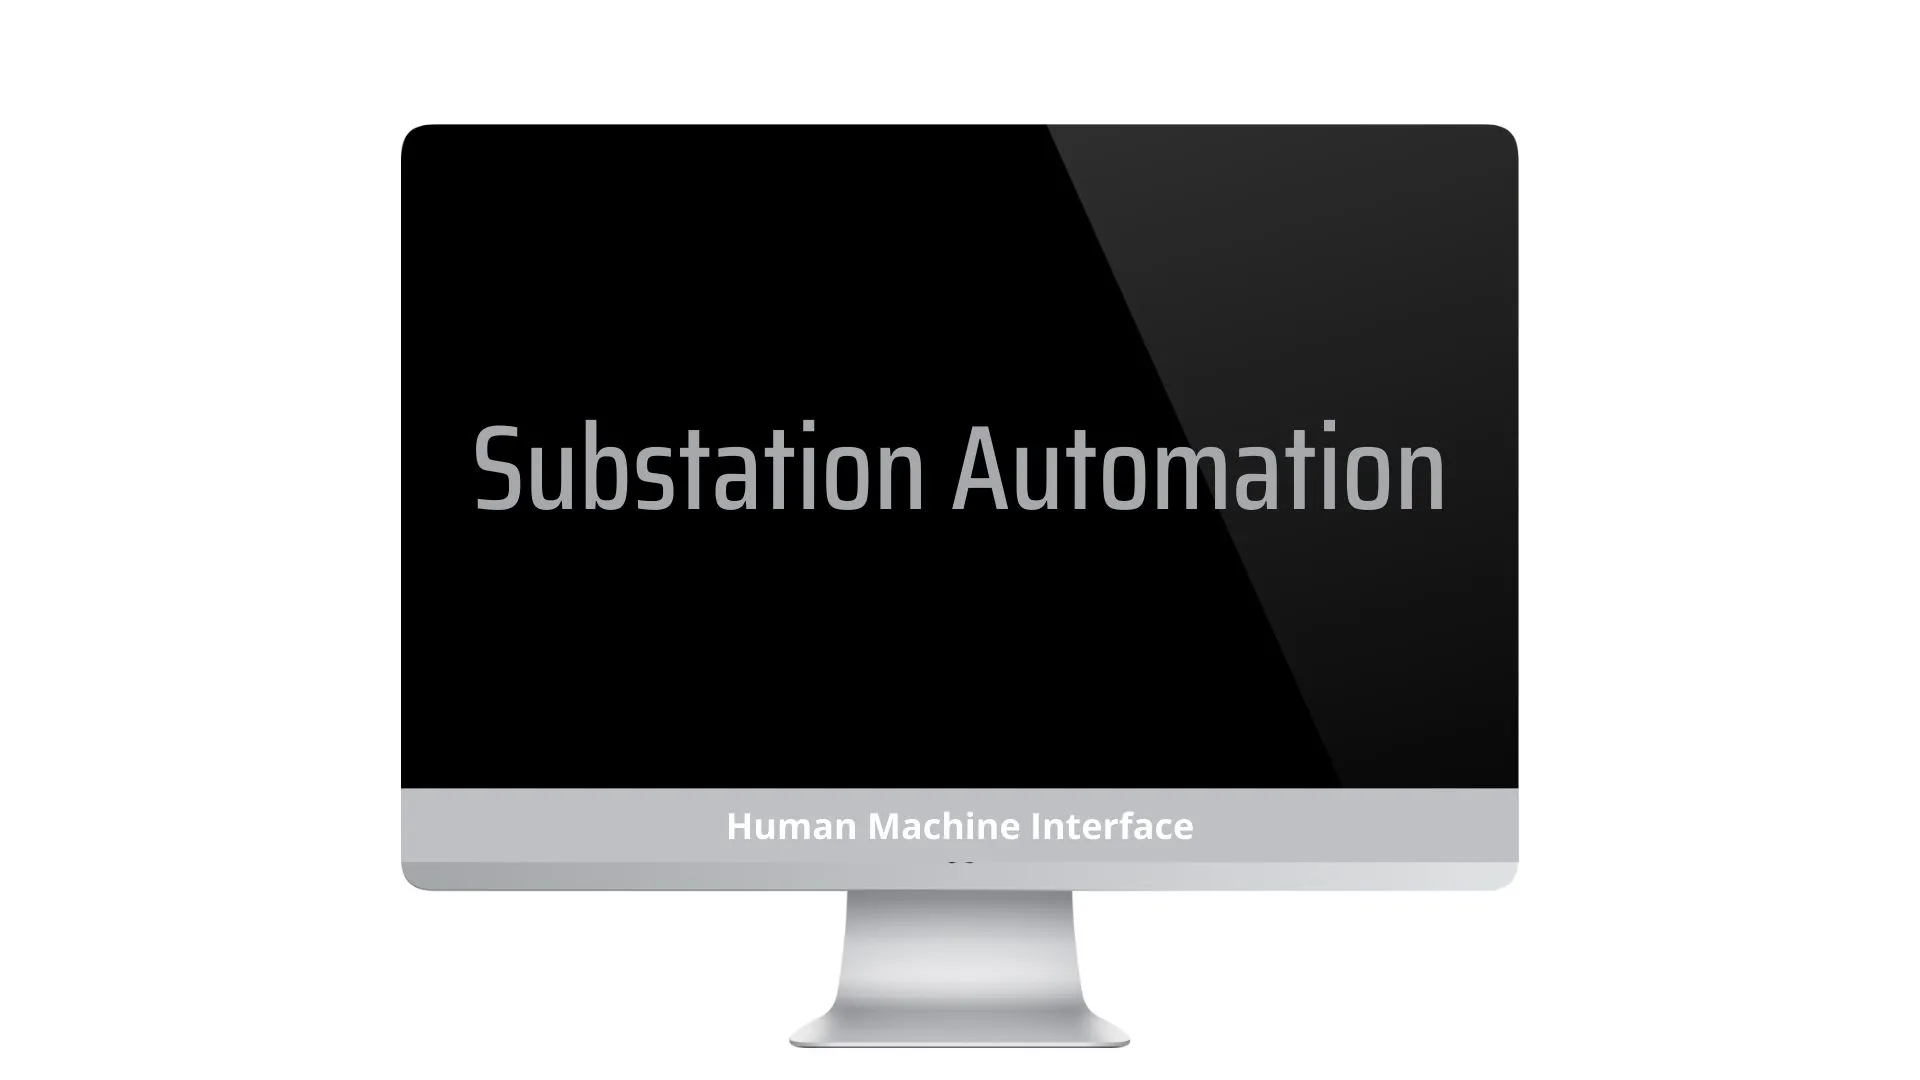 Substation Automation System